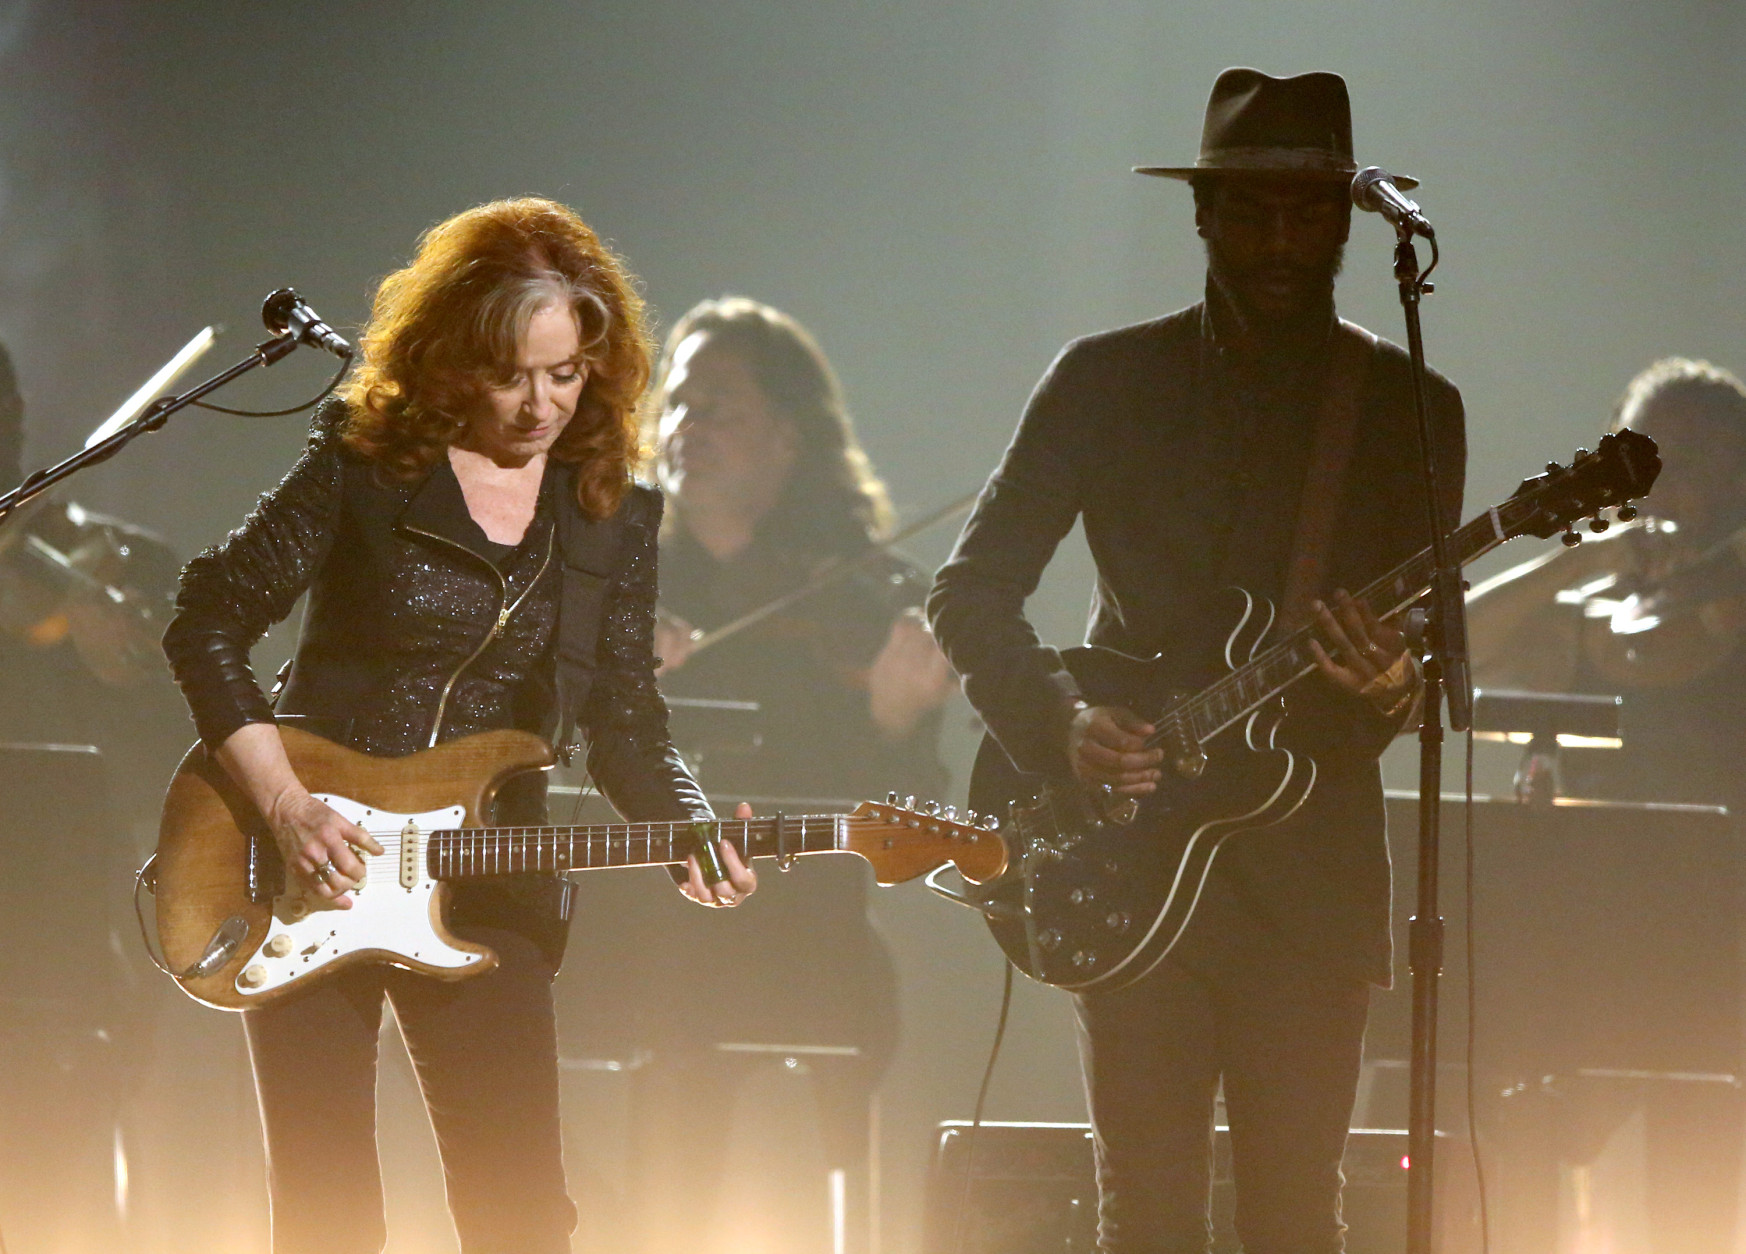 Bonnie Raitt, left, and Gary Clark Jr. perform a tribute to B.B. King at the 58th annual Grammy Awards on Monday, Feb. 15, 2016, in Los Angeles. (Photo by Matt Sayles/Invision/AP)